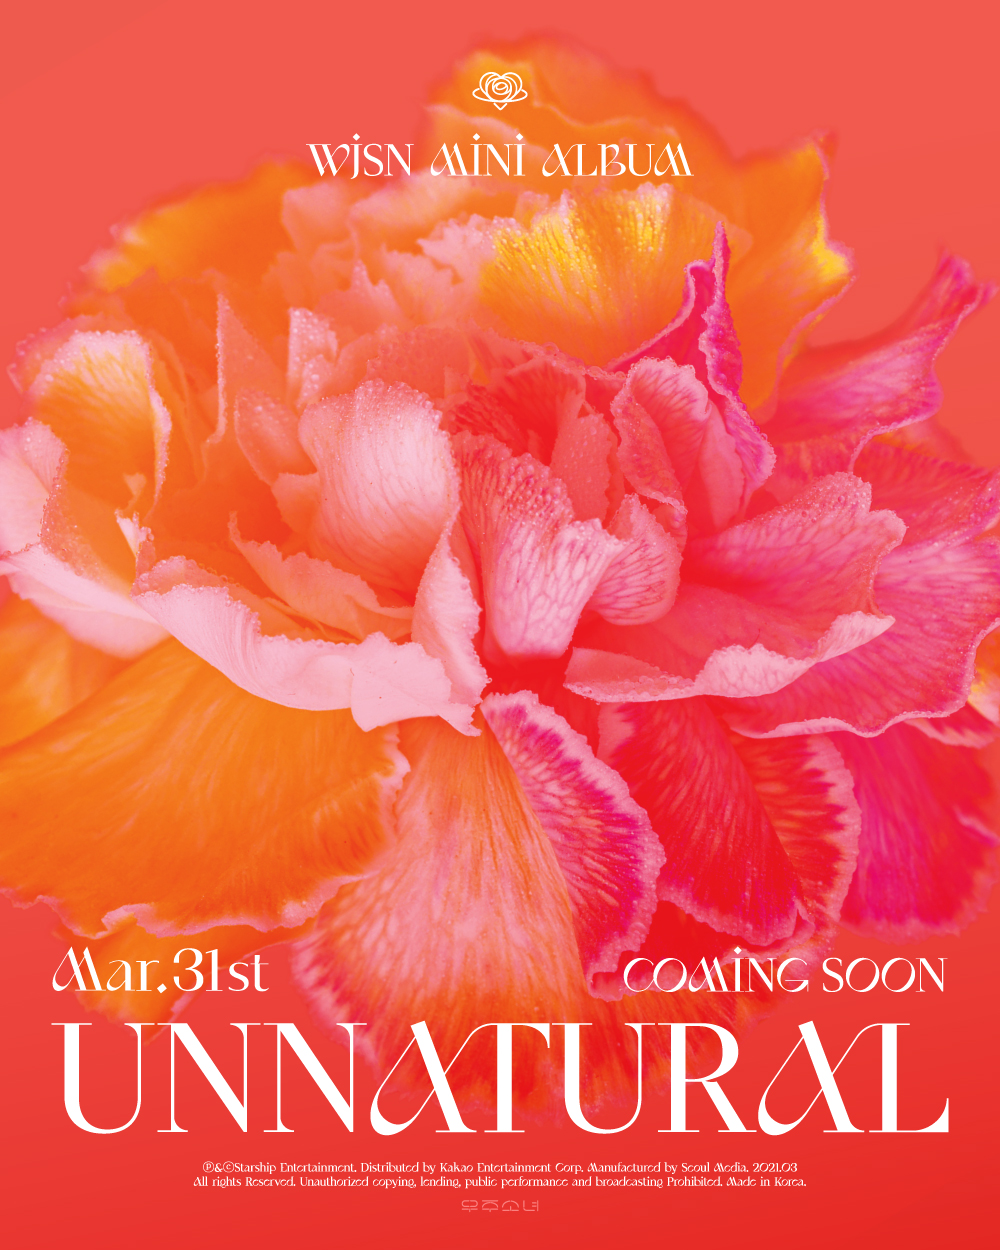 wjsn-unveils-details-for-comeback-on-march-31-with-mini-album-unnatural